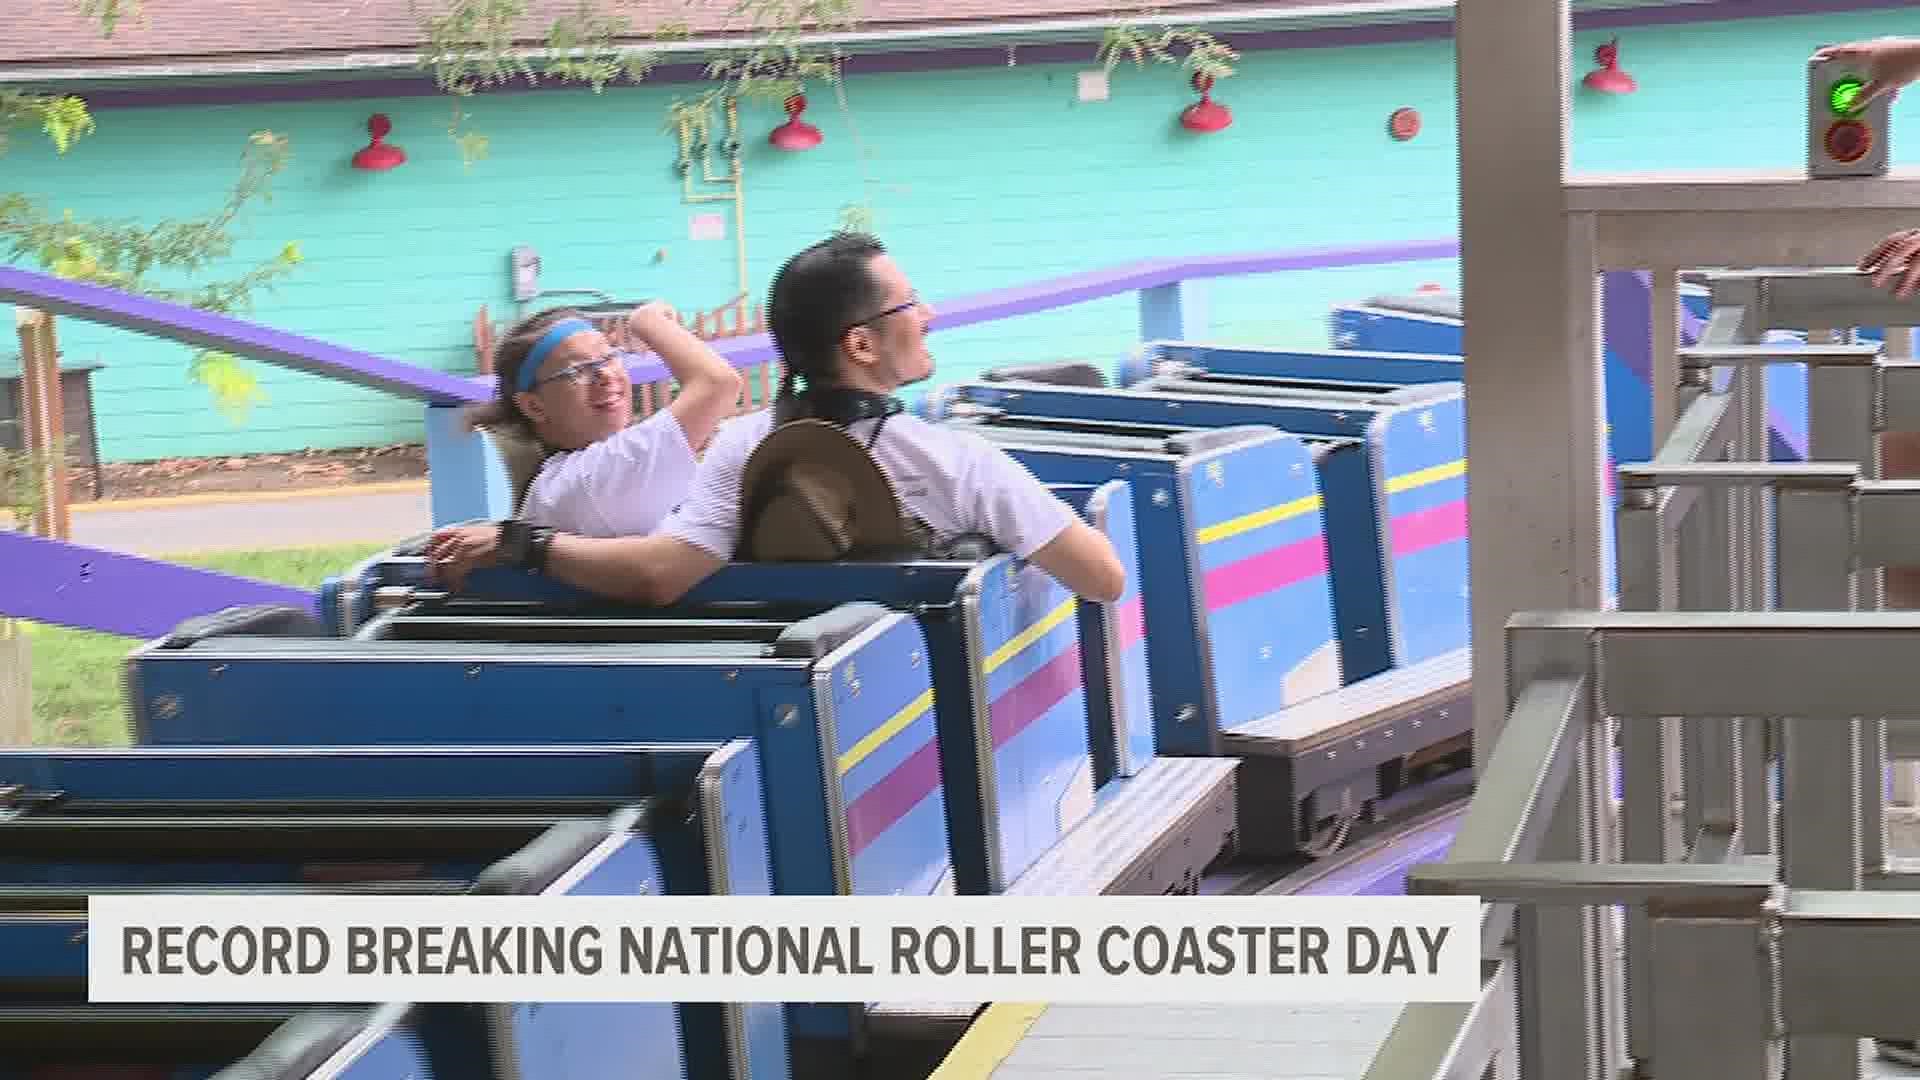 The pair broke a record in honor of National Roller Coaster Day on Aug. 16.